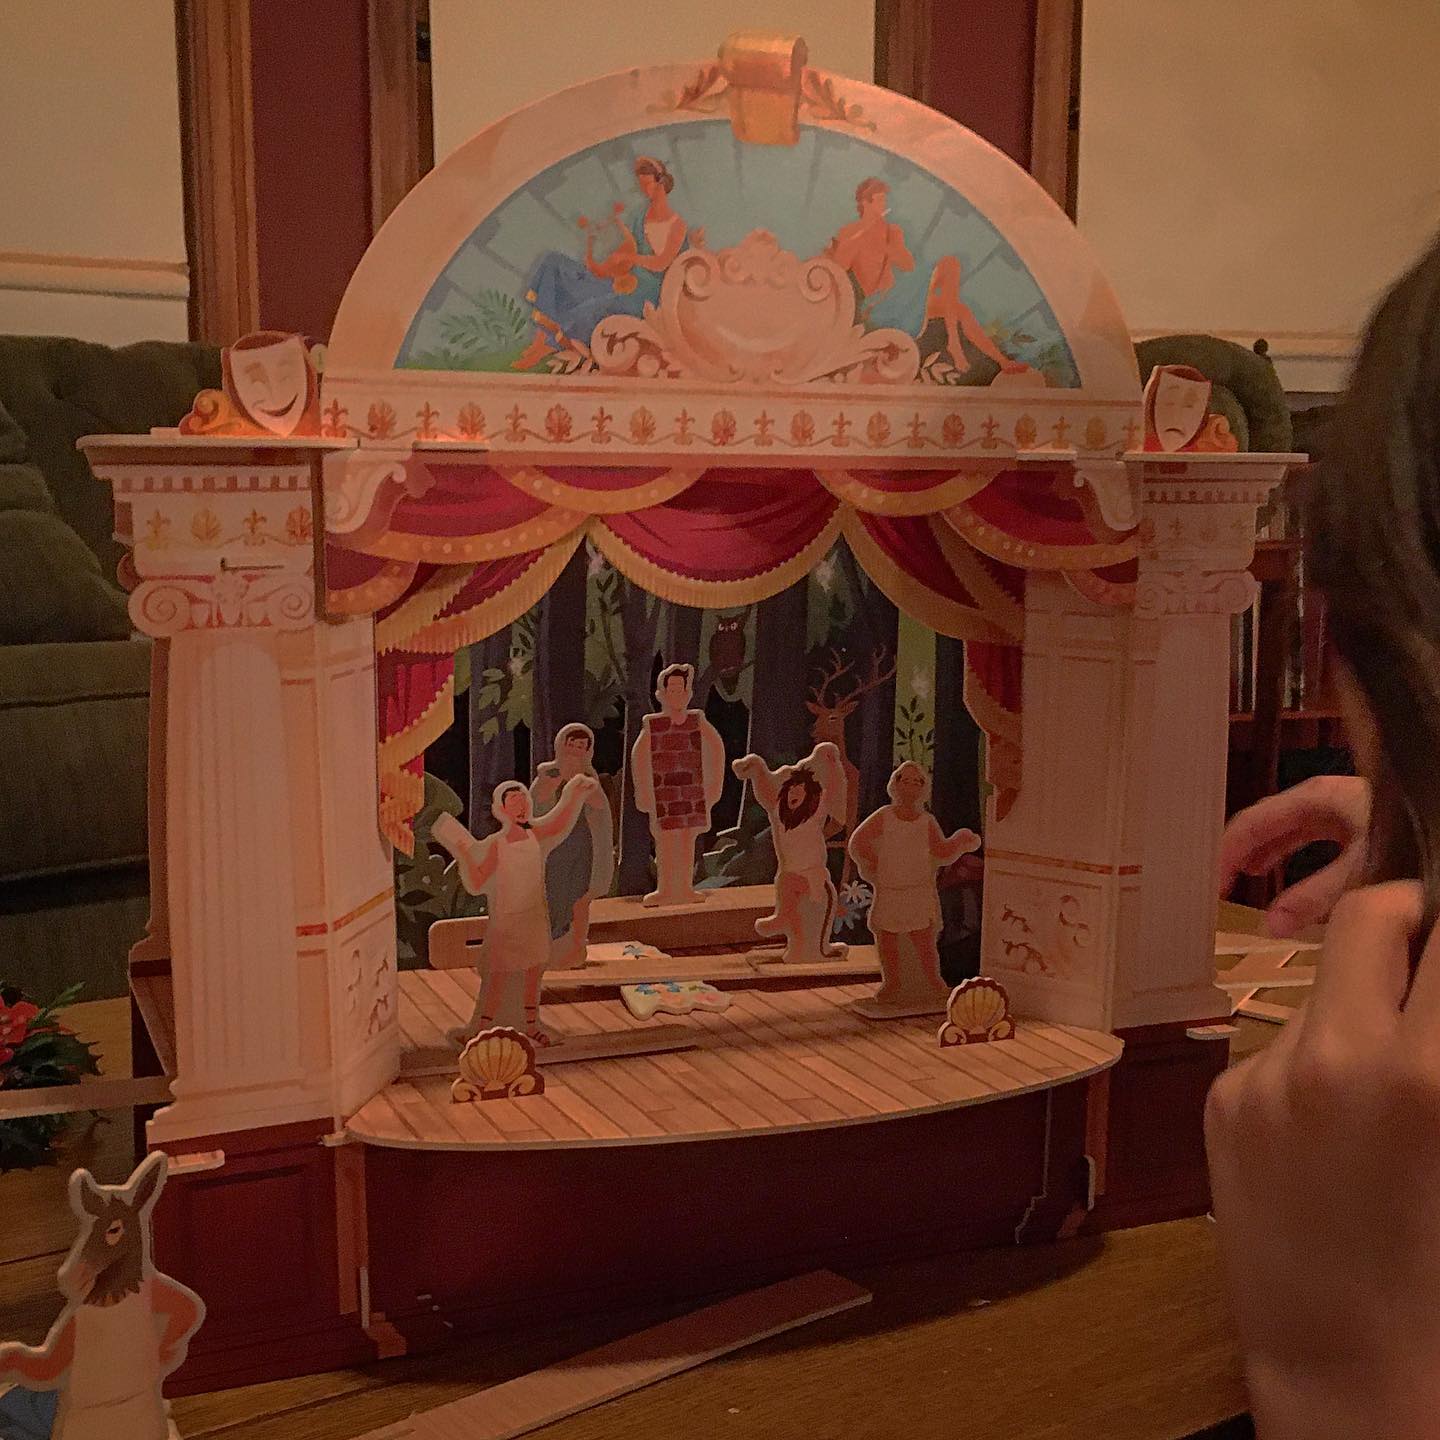 A small model of a theater for kids, made from printed foam boards put together, with characters from A Midsummer Night's Dream.